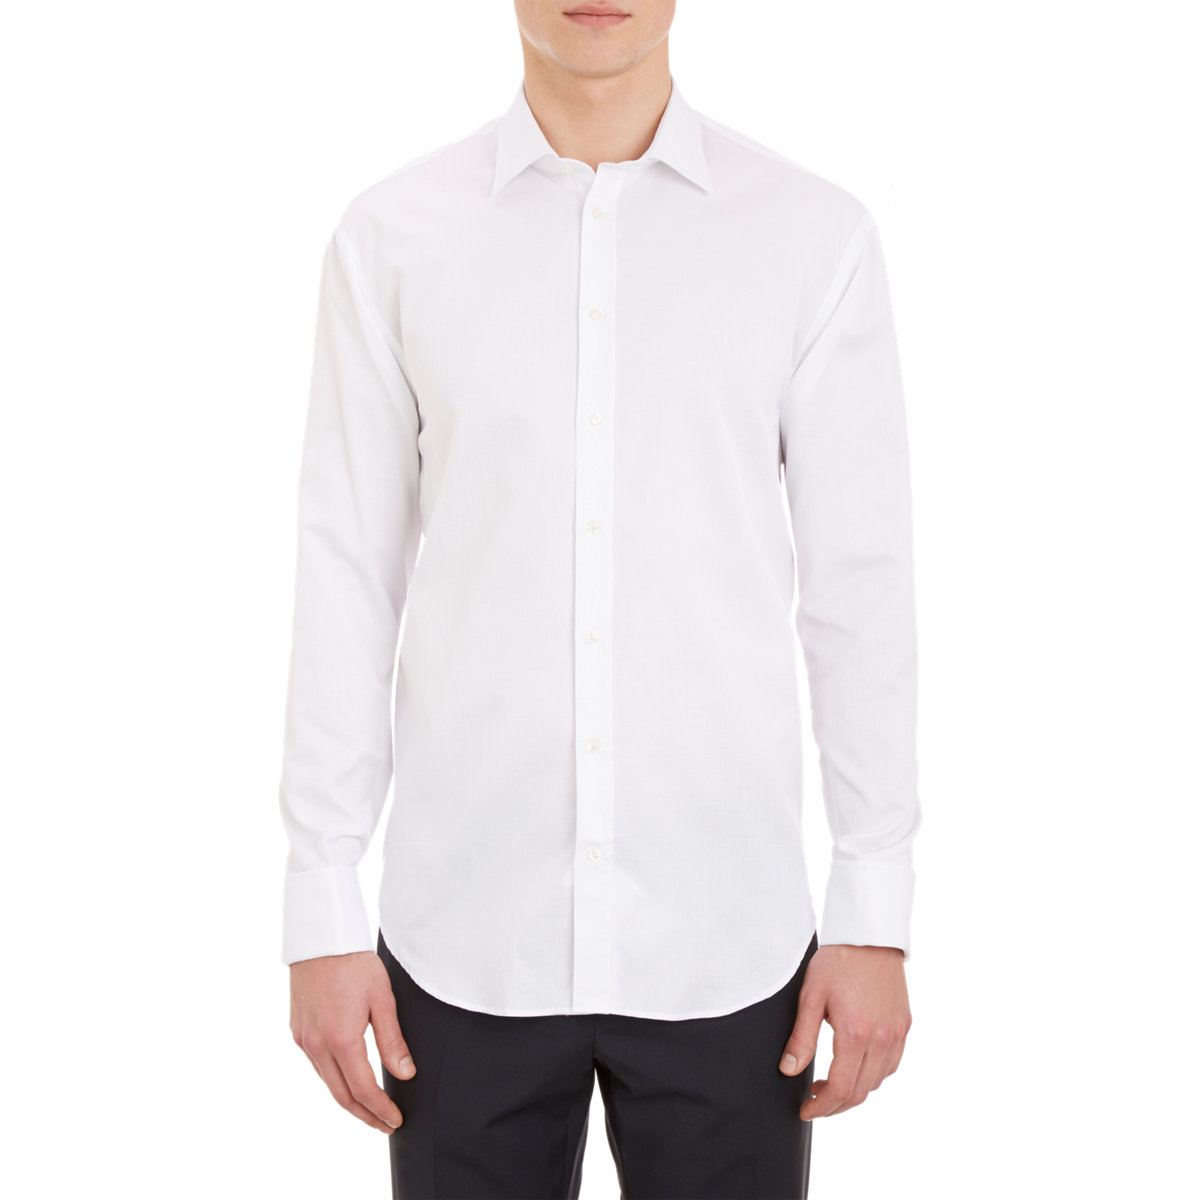 Lyst - Armani Textured Cotton Dress Shirt in White for Men